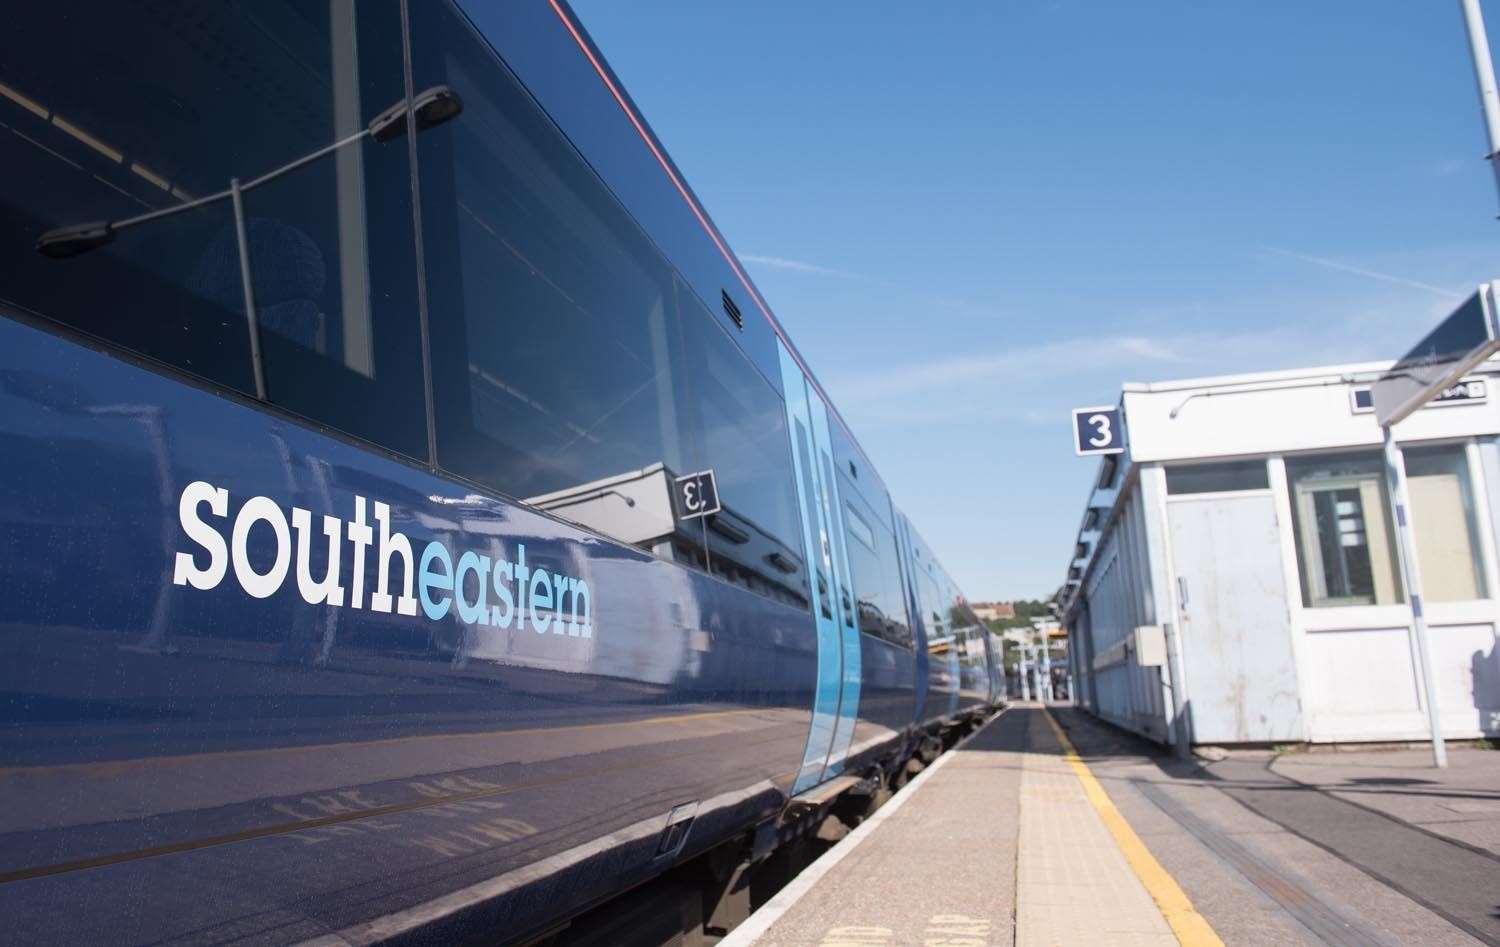 In the last five years, the number of female train drivers at Southeastern has more than doubled. Picture: Southeastern